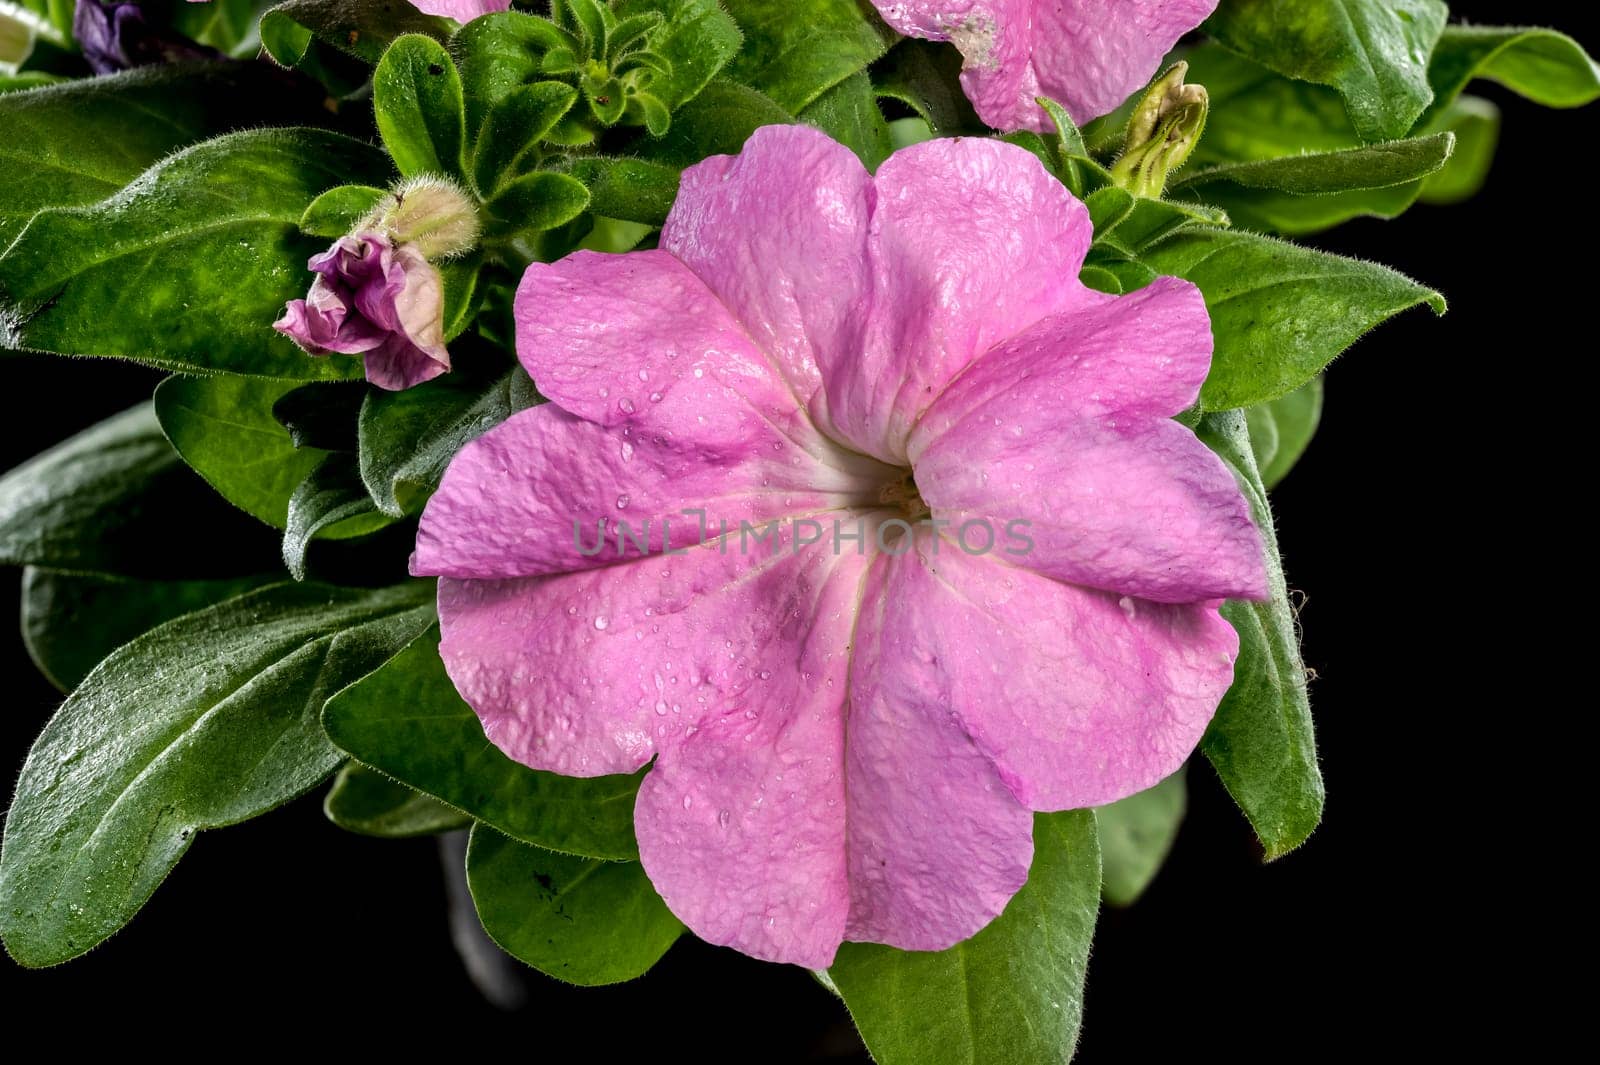 Beautiful Blooming violet Petunia Prism Lavender flowers on a black background. Flower head close-up.